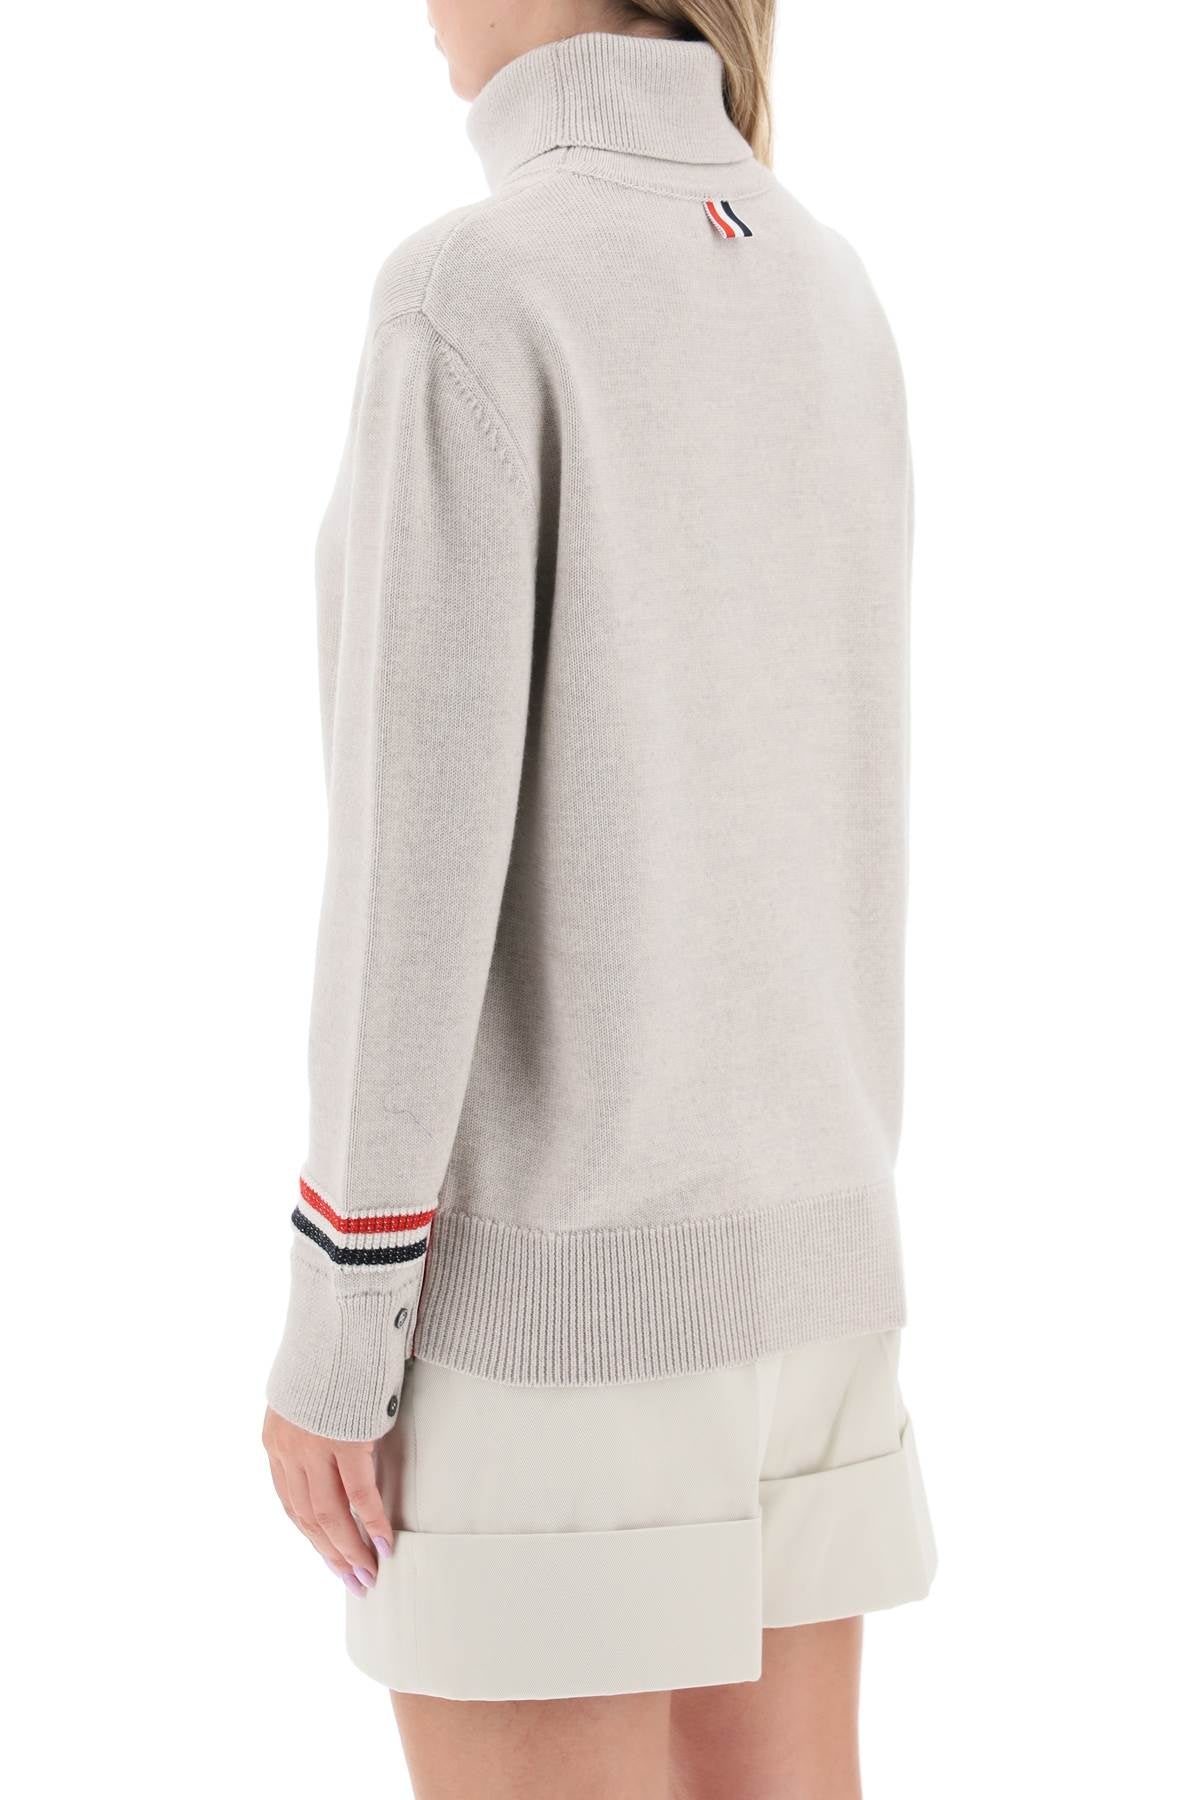 Thom Browne Turtleneck Sweatear With Tricolor Intarsia (Size - 42)